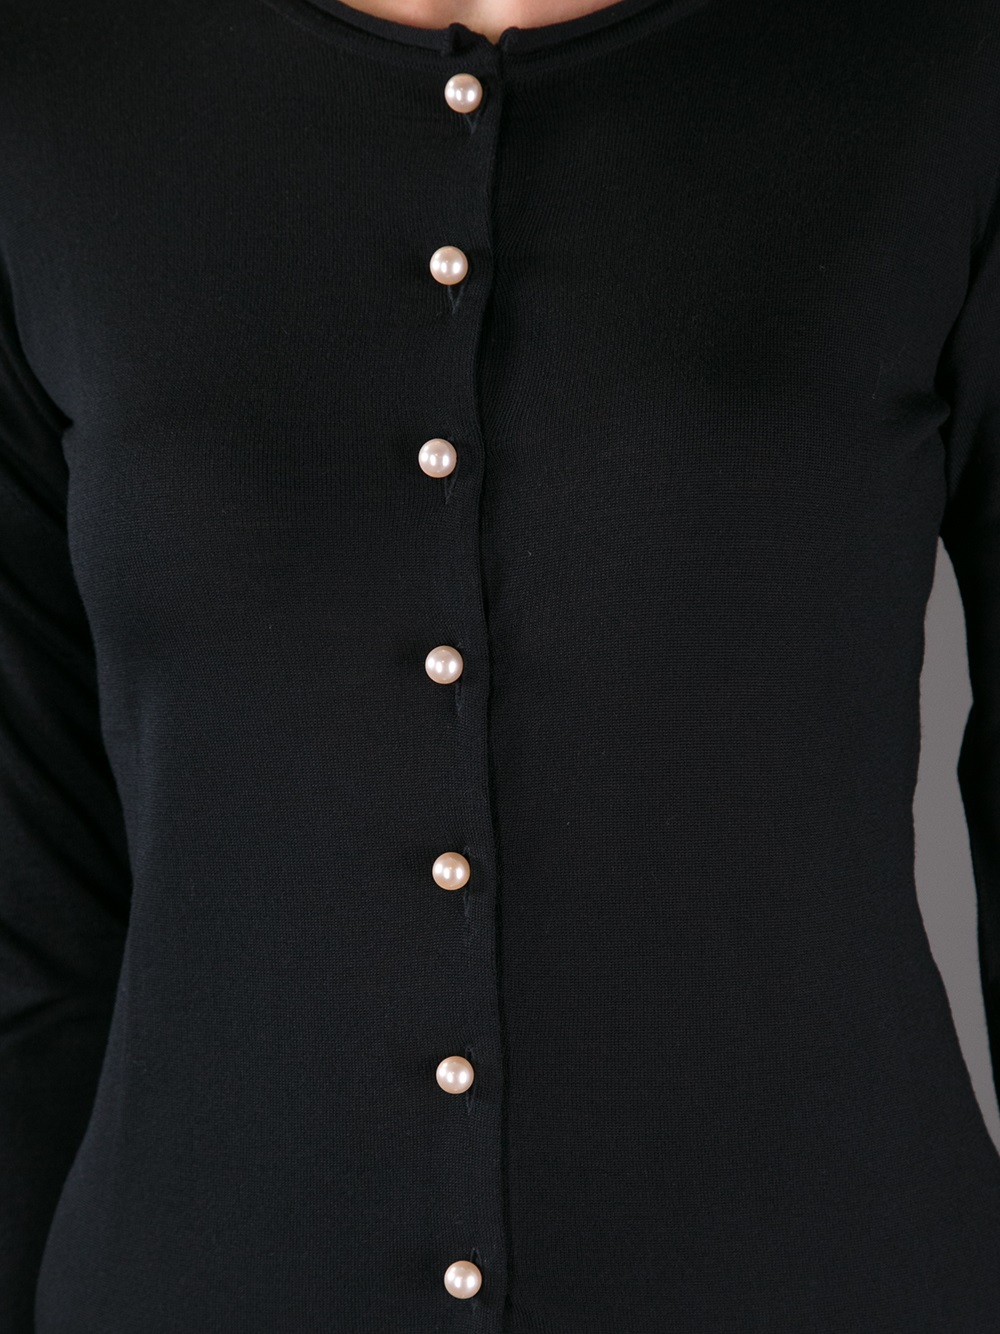 Boutique moschino Pearl Button Cardigan in Black | Lyst